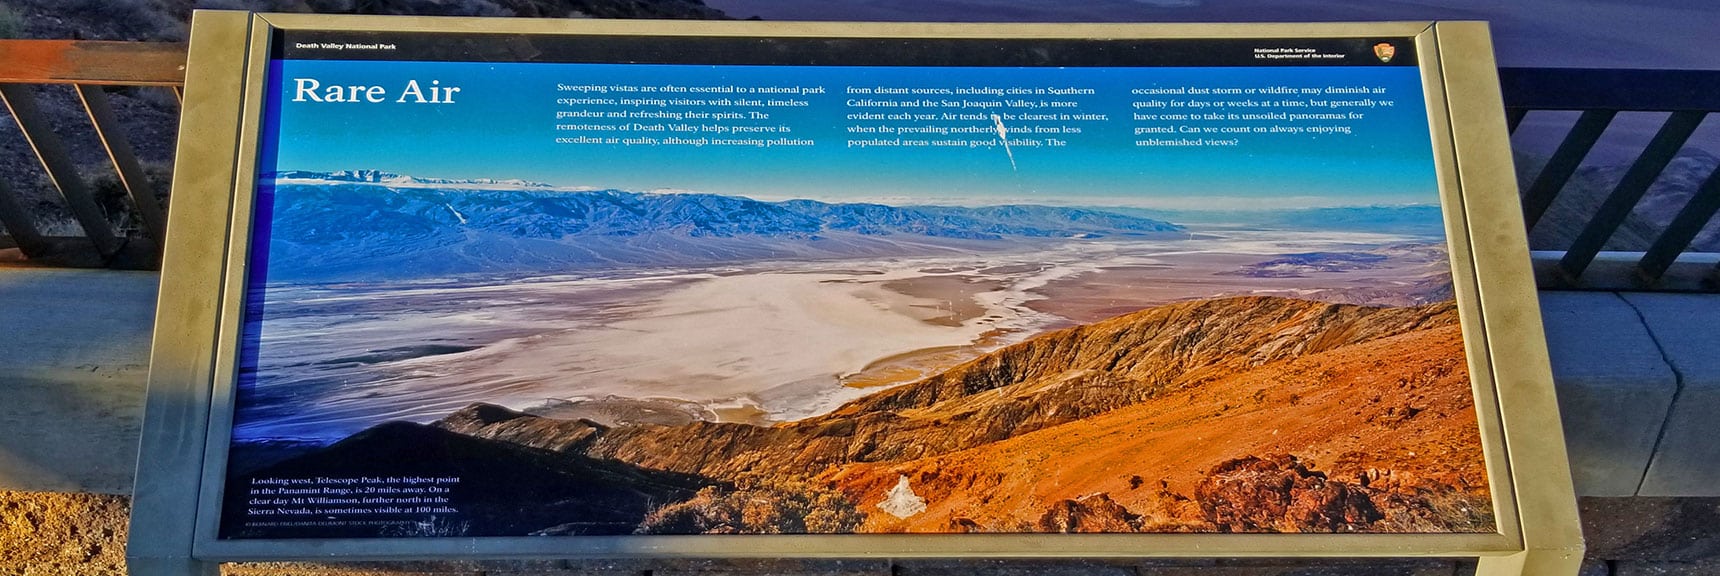 Rare Air Quality in Death Valley | Dante's View to Mt. Perry | Death Valley National Park, CA